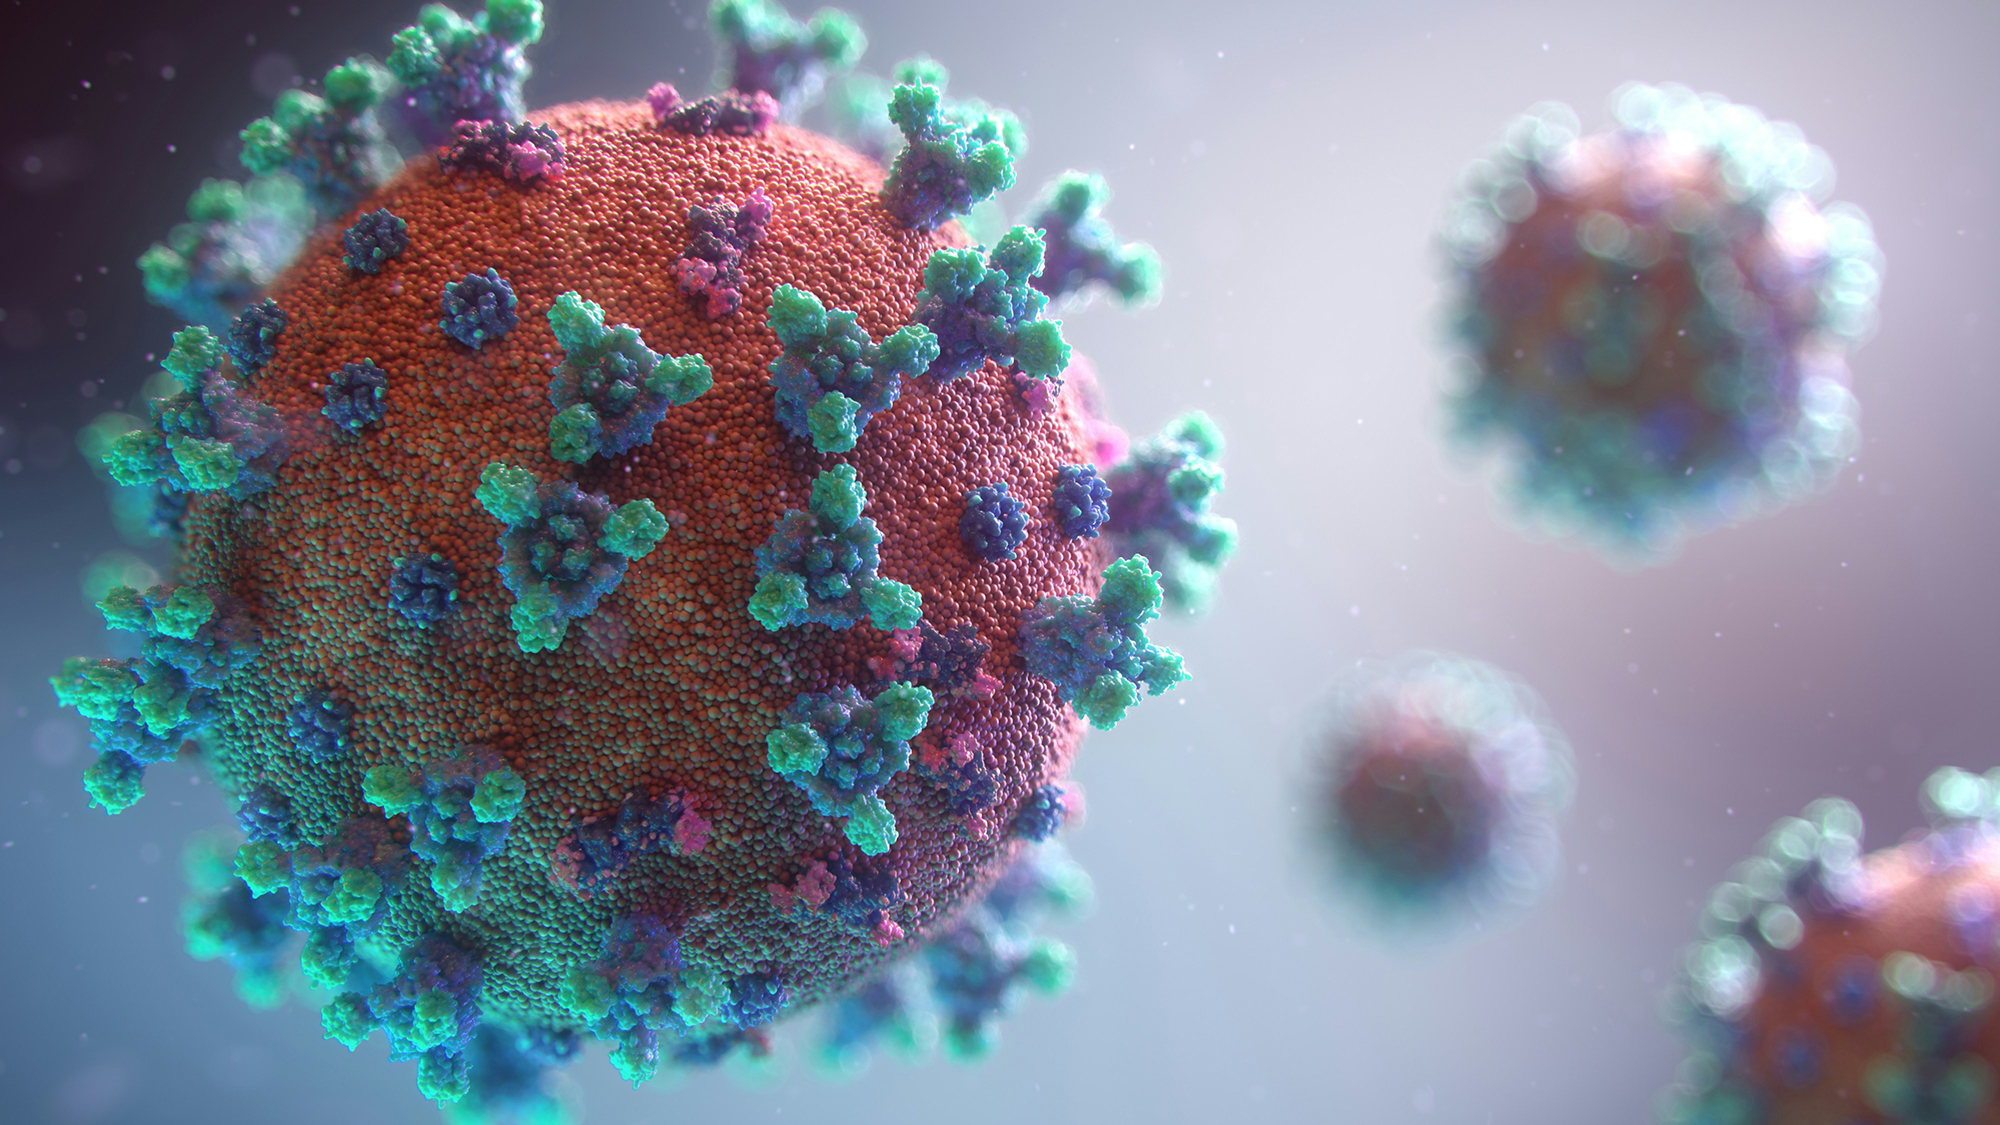 Arsuaga and an interdisciplinary team of researchers developed an artificial intelligence model capable of identifying coronavirus that could “spill over” from animals to humans. (Coronavirus visualization by Fusion Medical Animation)